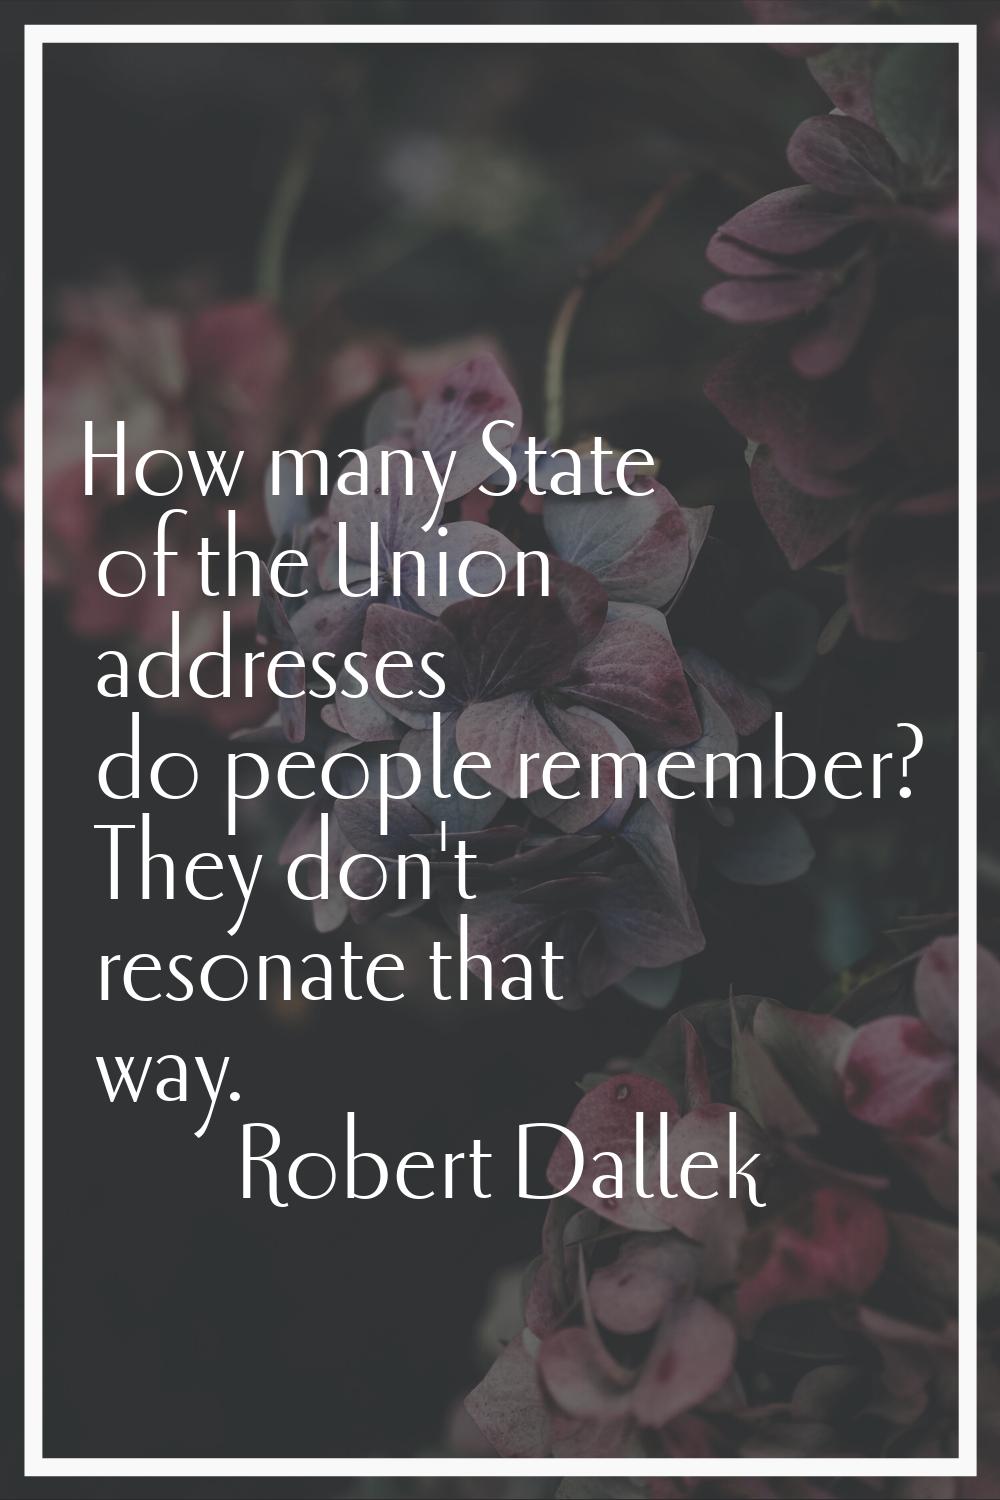 How many State of the Union addresses do people remember? They don't resonate that way.